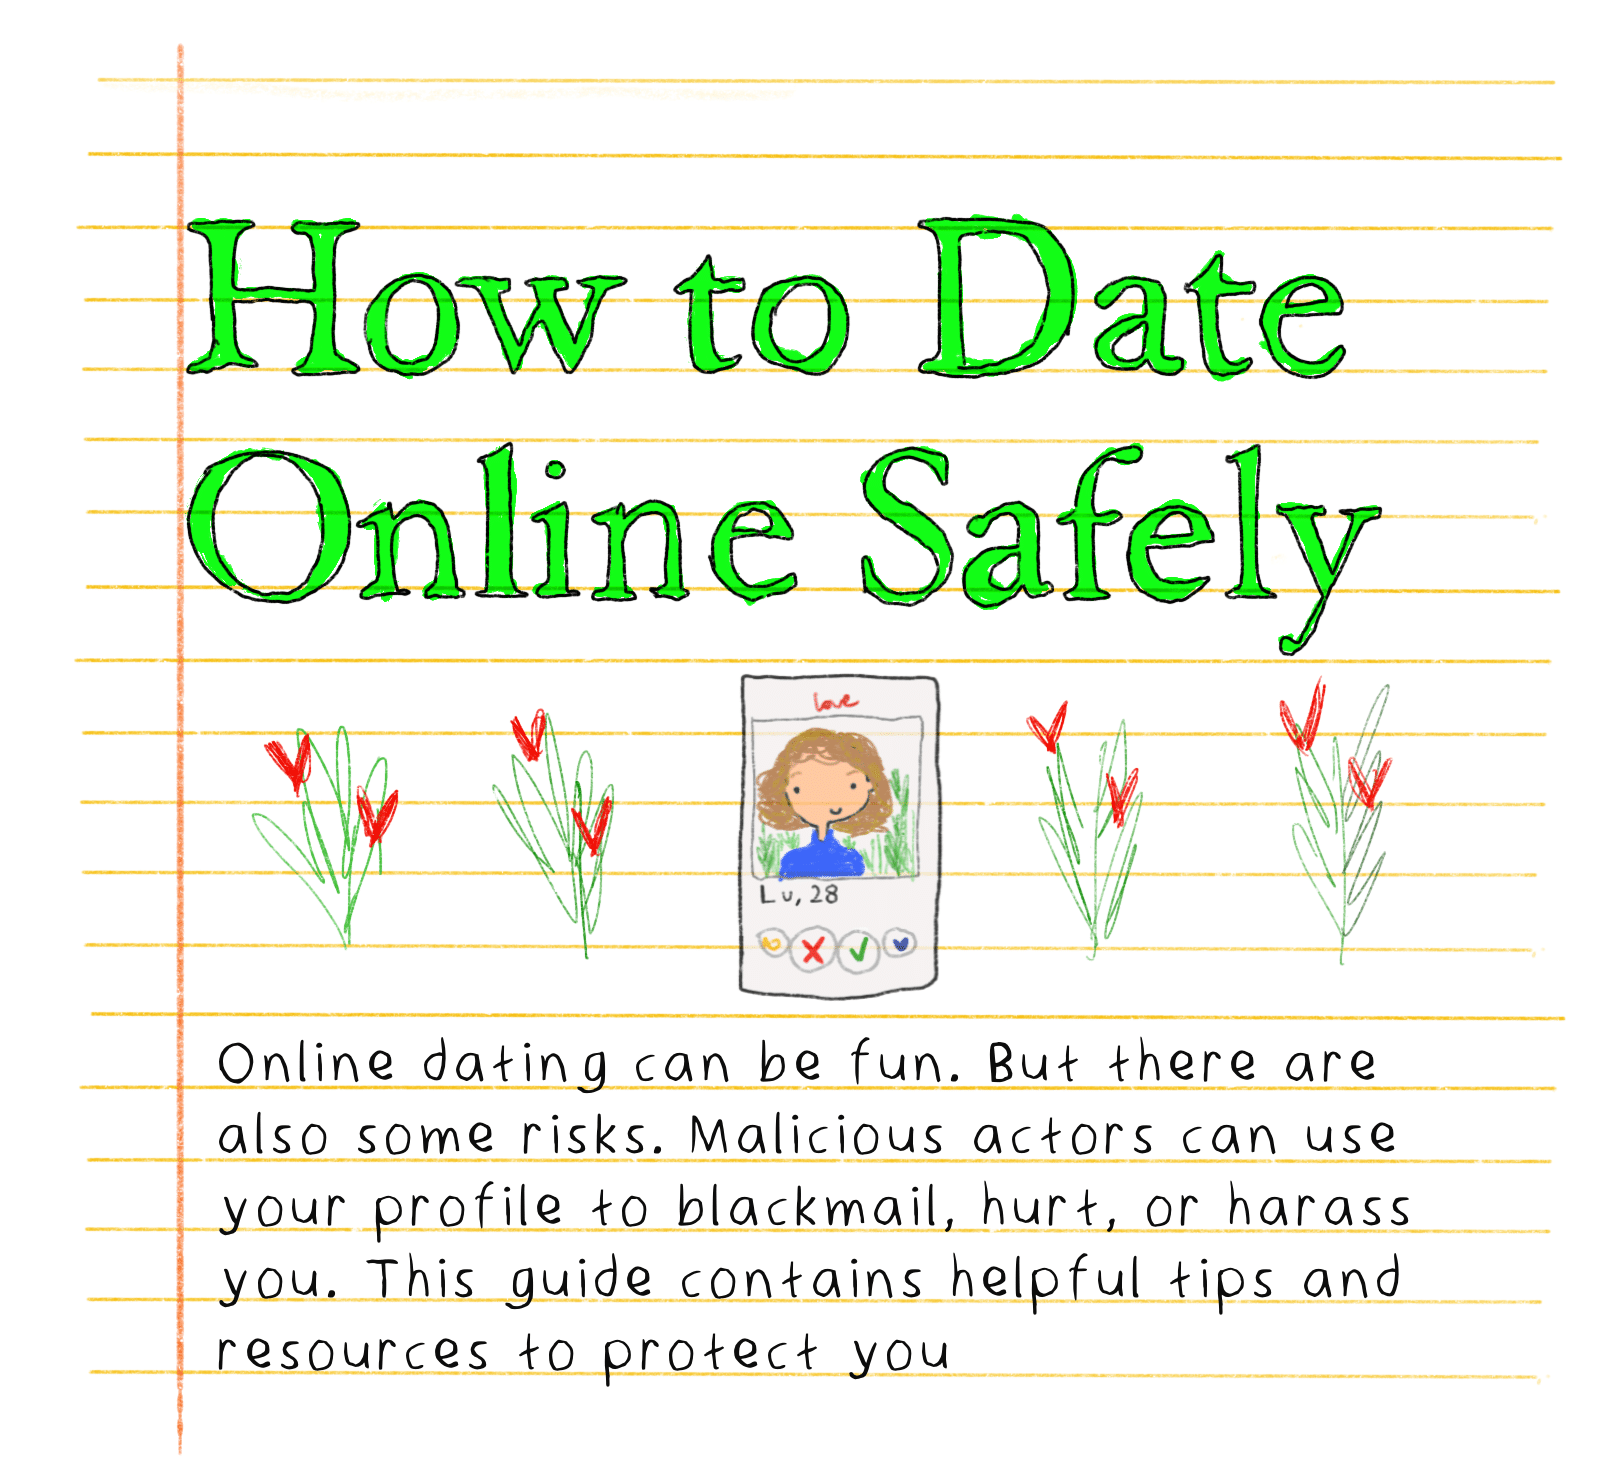 How to Date Online Safely - Online dating can be fun. But there are also some risks — Malicious actors can use your profile to blackmail, hurt, or harass you. This guide contains helpful tips and resources to protect you. 